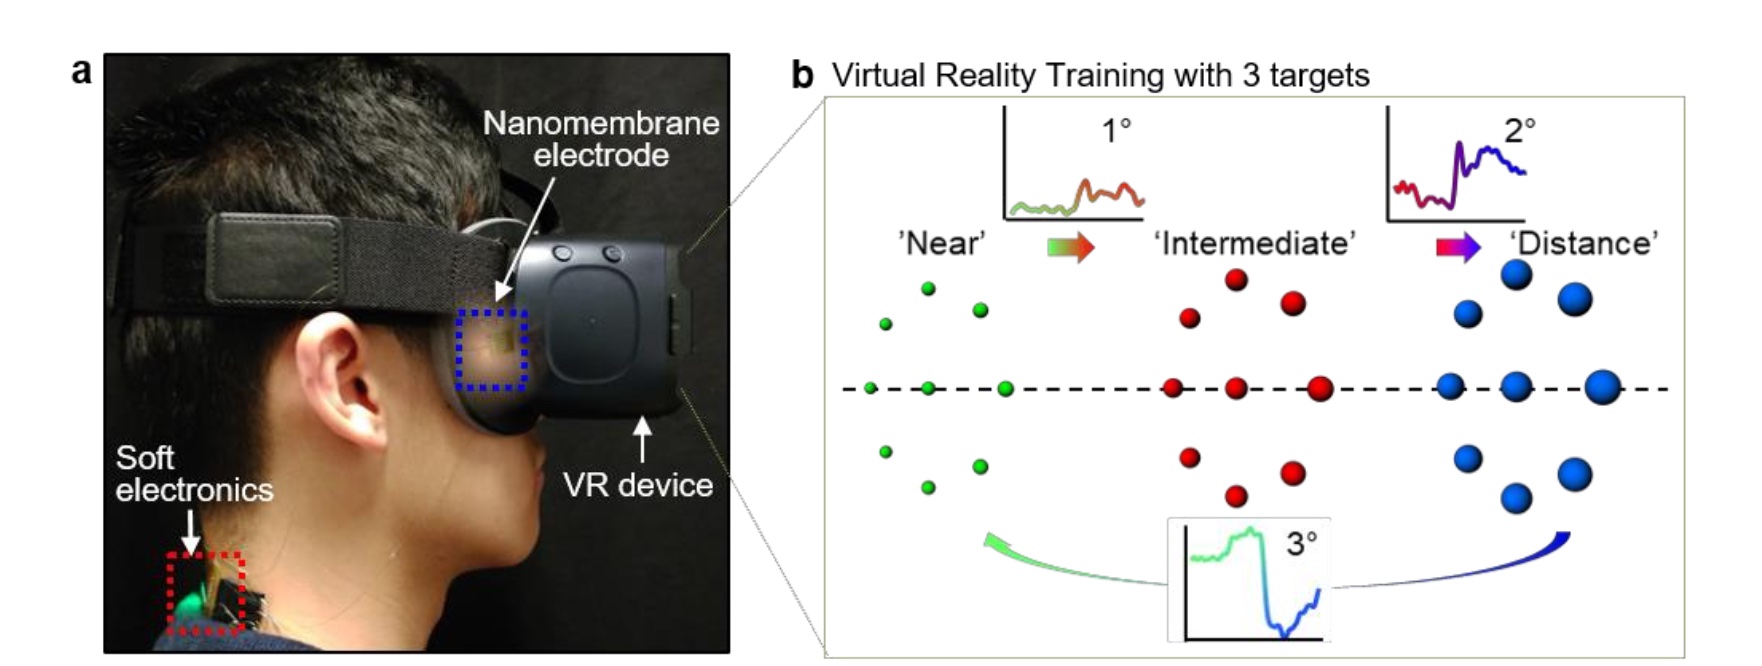 Figure has two parts. (a) Photo of a person in profile wearing the wireless ocular electronic system. Labels illustrate the nanomembrane electrode near subject’s eye, the VR device, and the soft electronics at the base of the person’s neck. (b) Virtual Re